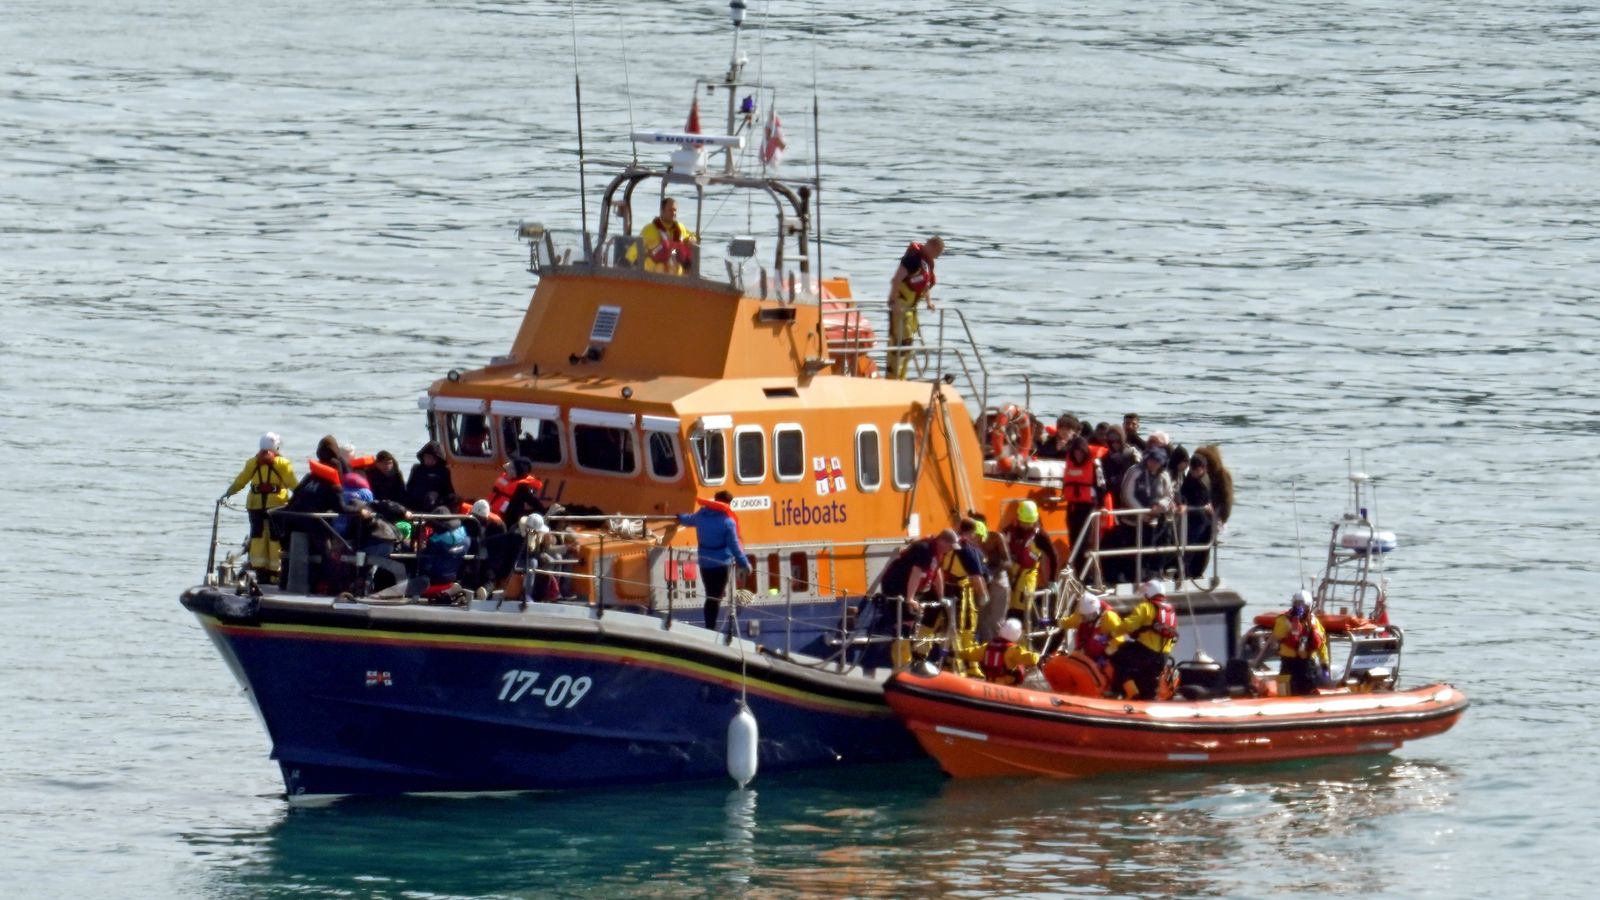 More than 500 migrants cross English Channel on Wednesday, provisional statistics show